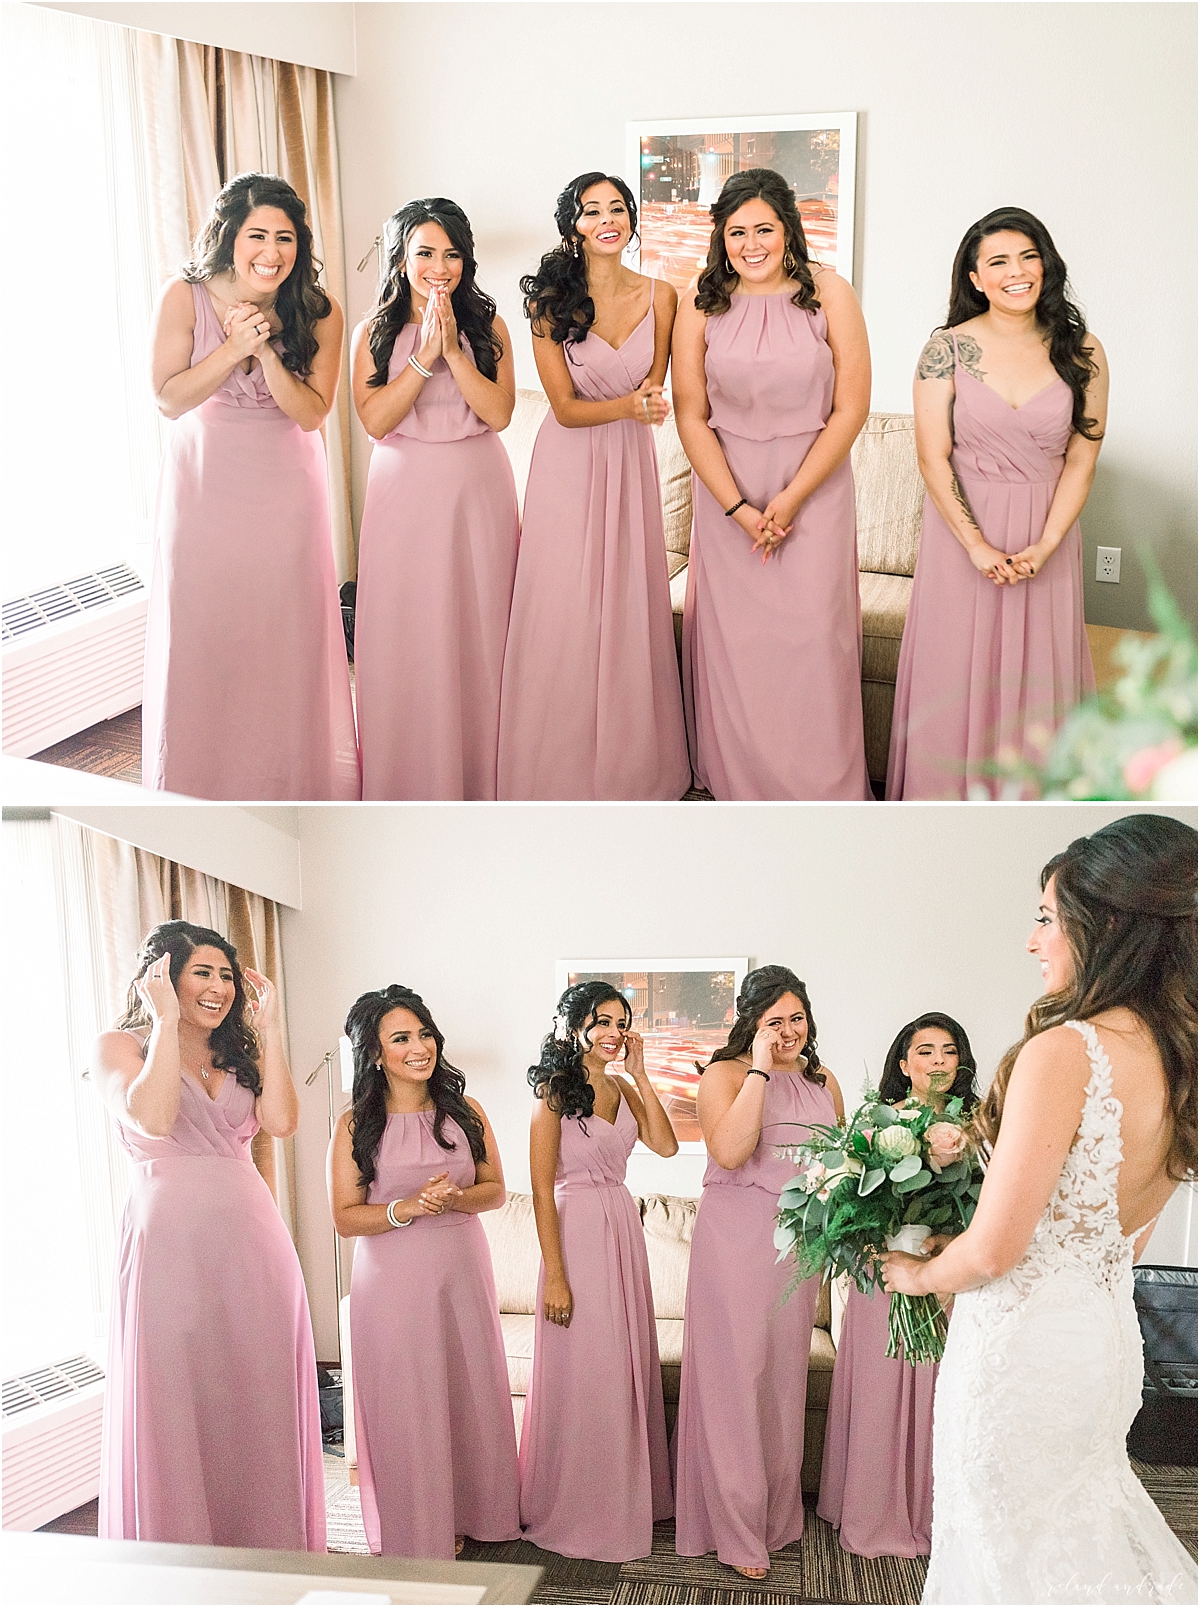 Tuscany Falls Wedding + Light and Airy Wedding Photographer Chicago, Mokena Wedding Photographer + Chicago Latino Photography + Naperville Wedding Photographer + Chicago Engagement Photographer + Best Photographer In Chicago_0027.jpg